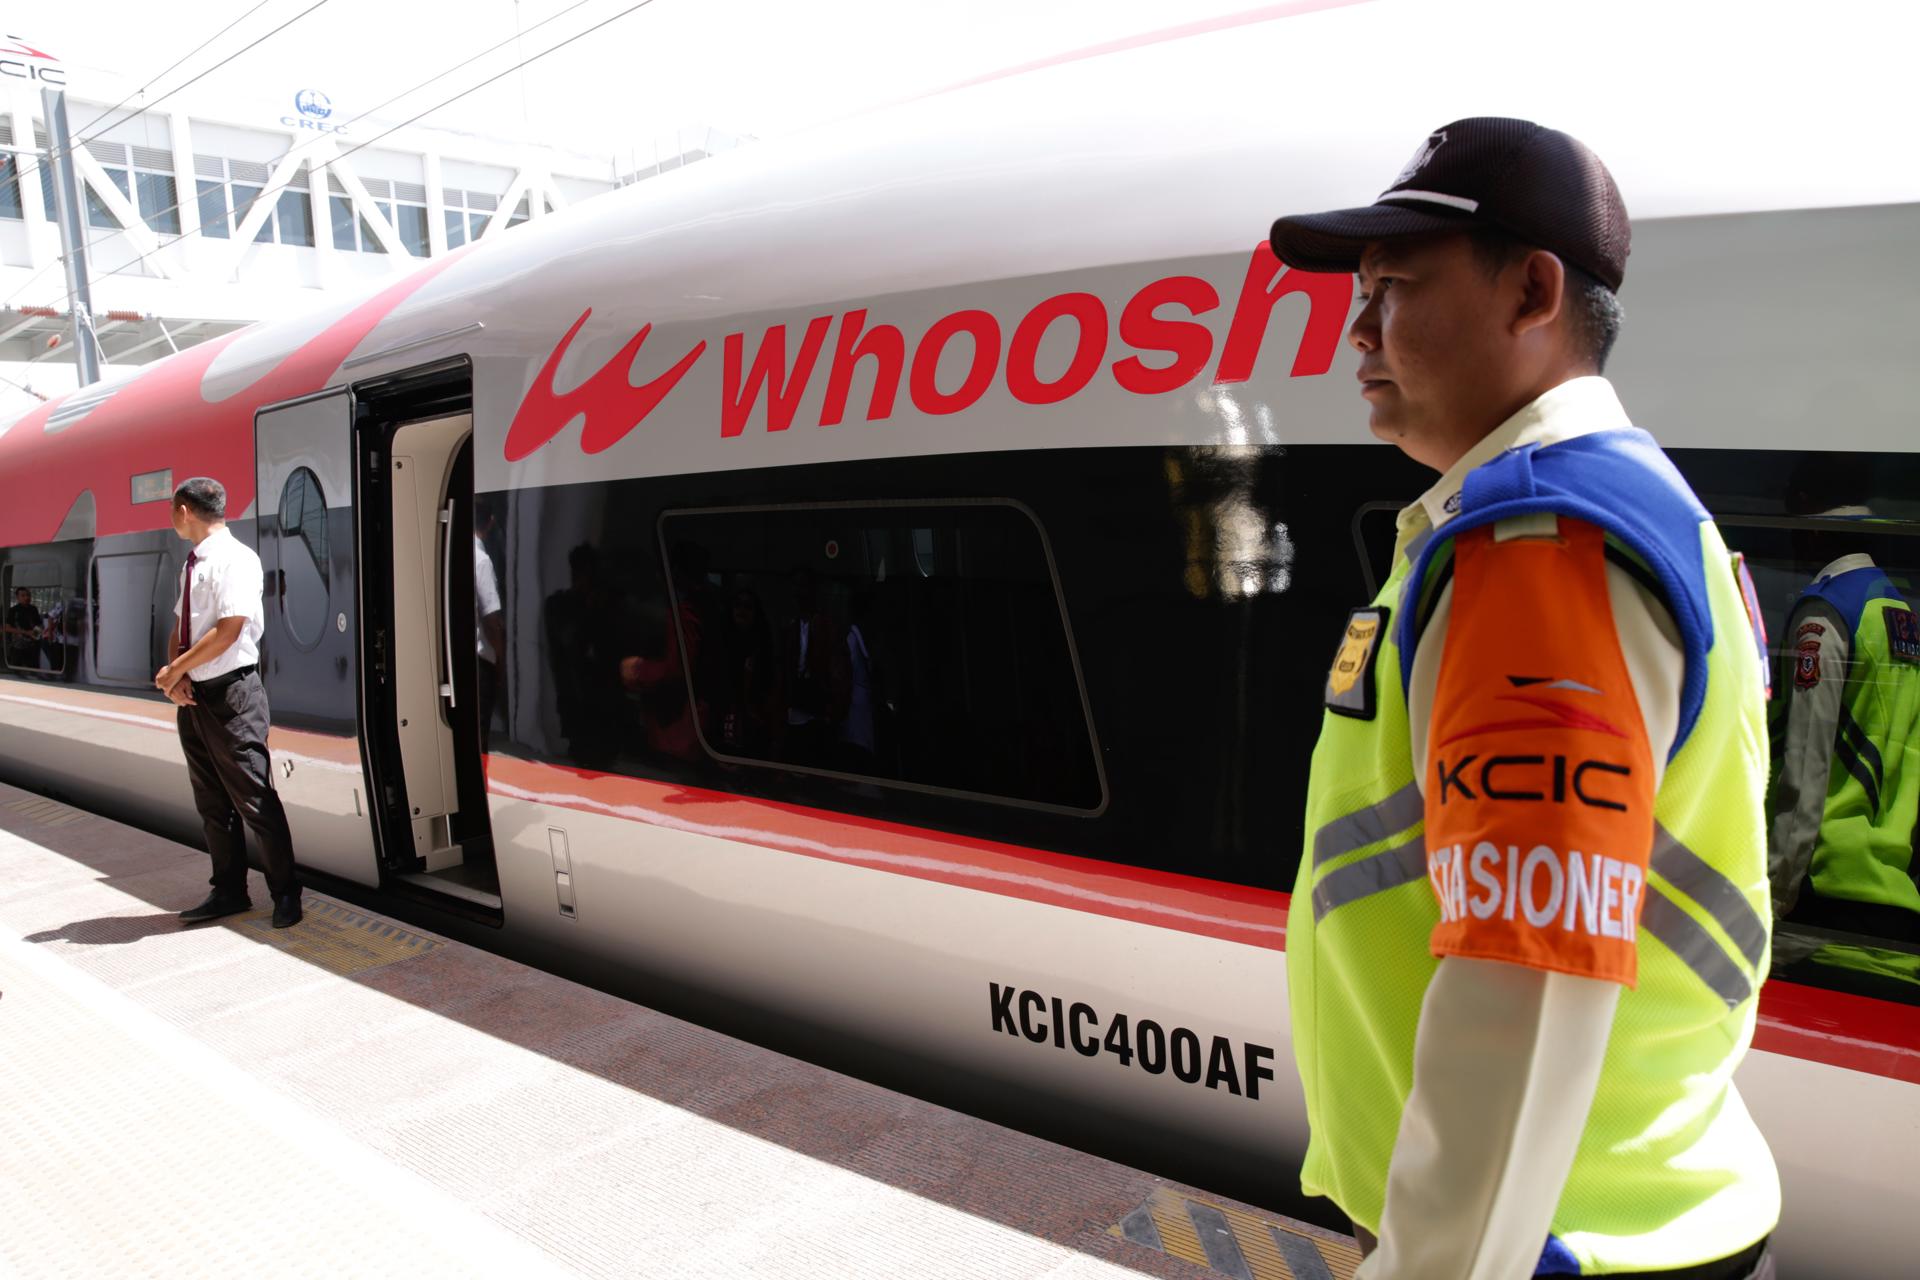 A security officer stands beside the Jakarta-Bandung High-Speed Train during the inauguration ceremony, lead by Indonesian President Joko Widodo (not pictured), at Halim Station in Jakarta, Indonesia, 02 October 2023. EFE/EPA/ADI WEDA